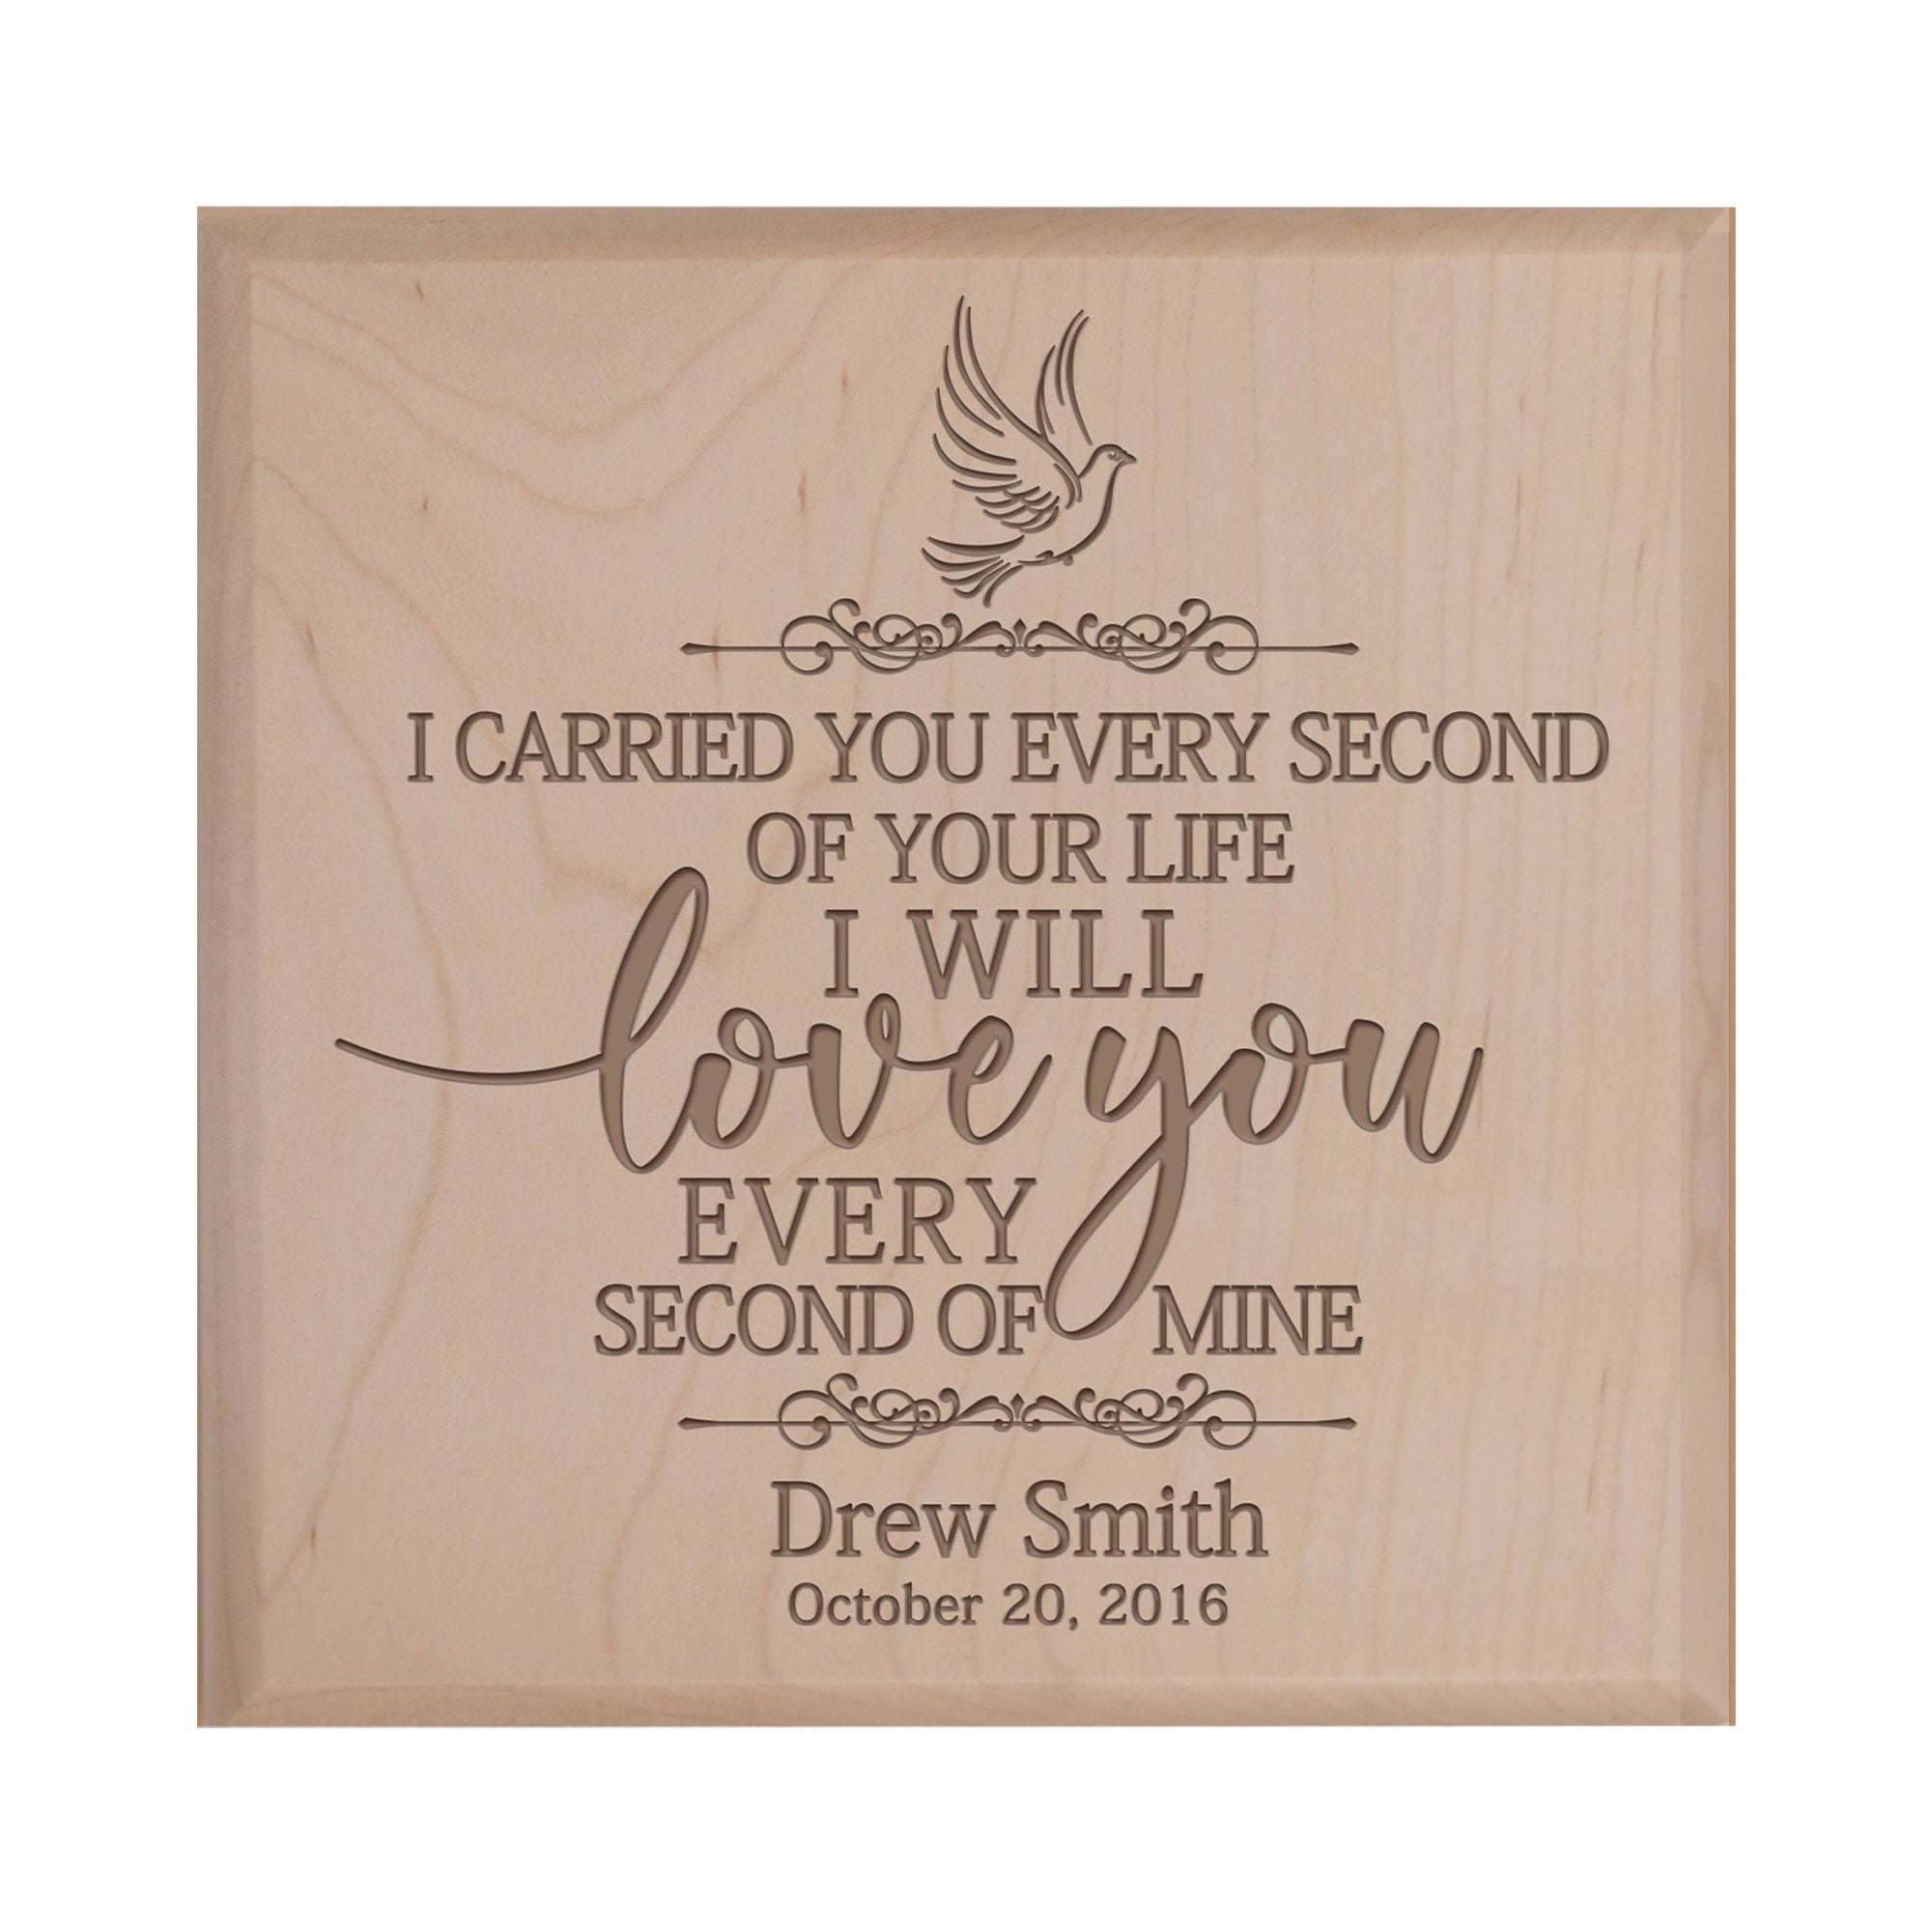 Personalized Memorial Cremation Urn 5.5x5.5x3.5 I Carried You (Dove) - LifeSong Milestones